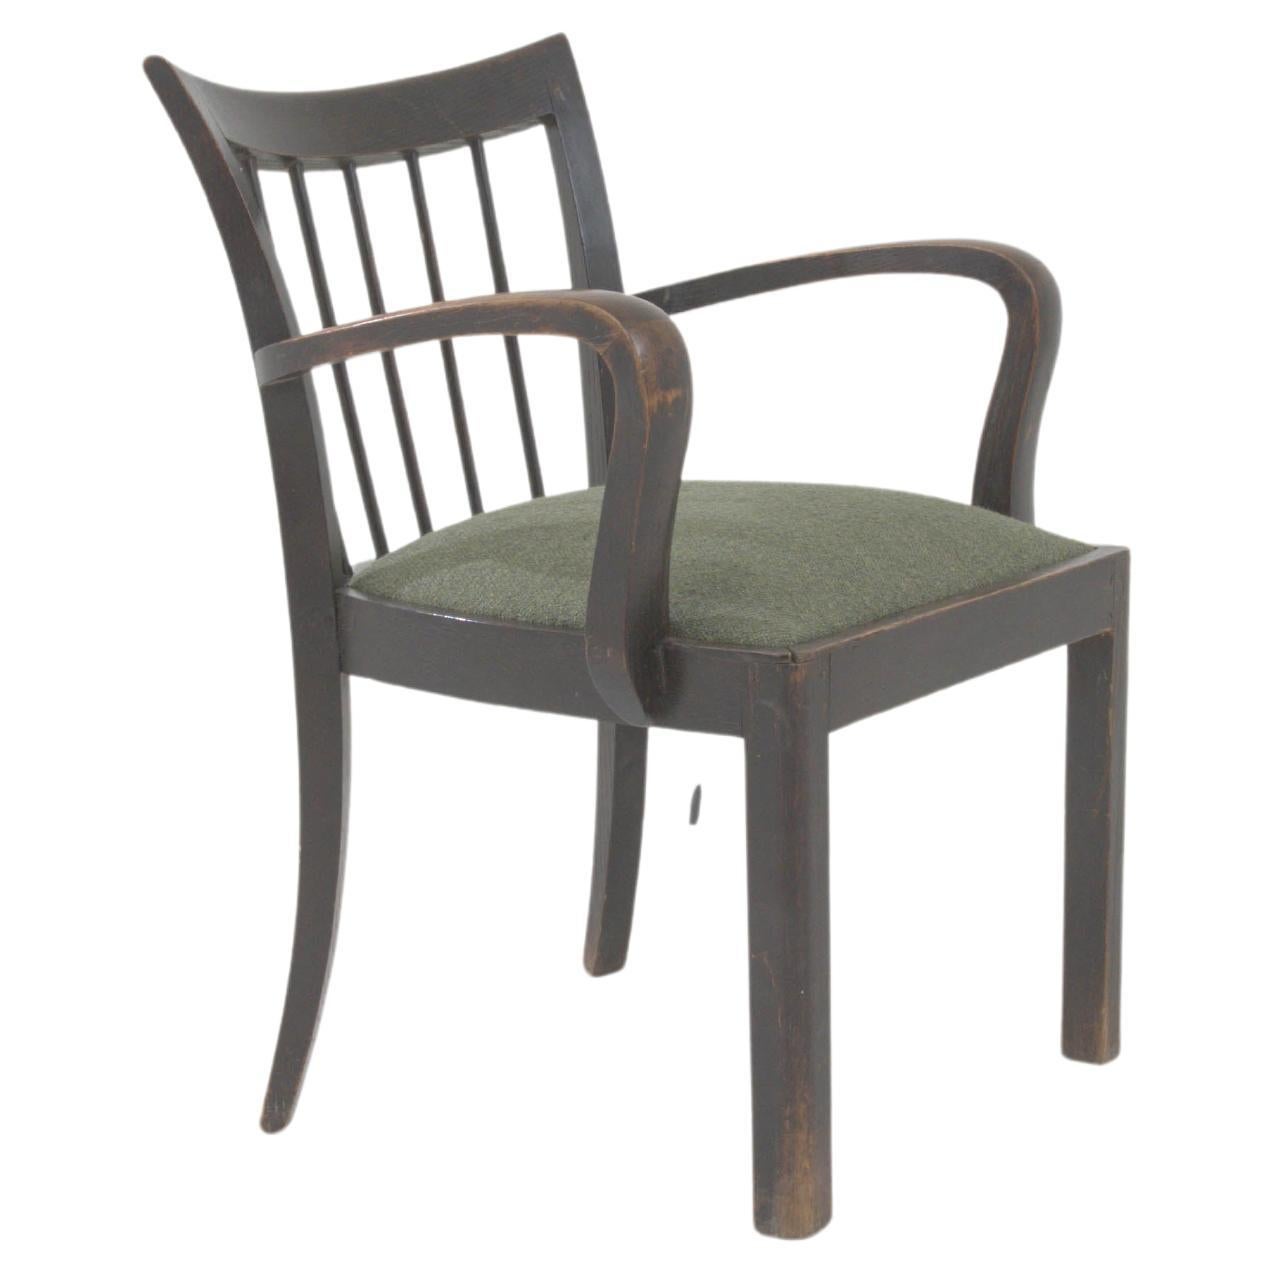 20th Century French Wooden Armchair With Upholstered Seat For Sale